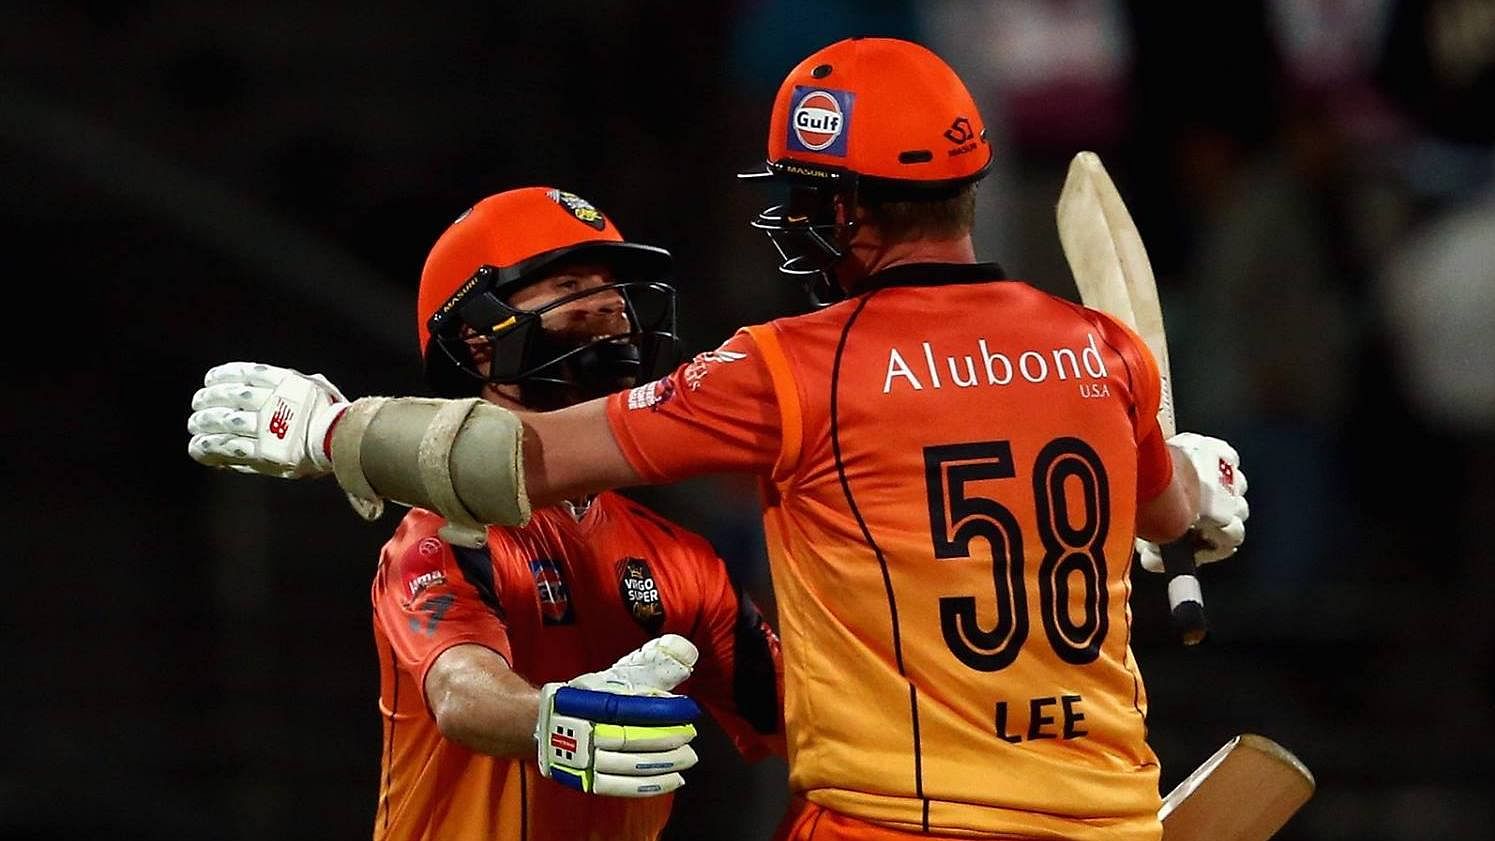 James Foster and Brett Lee celebrate after clinching a thrilling victory for the Virgo Super Kings. (Photo Courtesy: <a href="https://web.facebook.com/MCL2020UAE/photos_stream">Masters Champions League Facebook</a>)